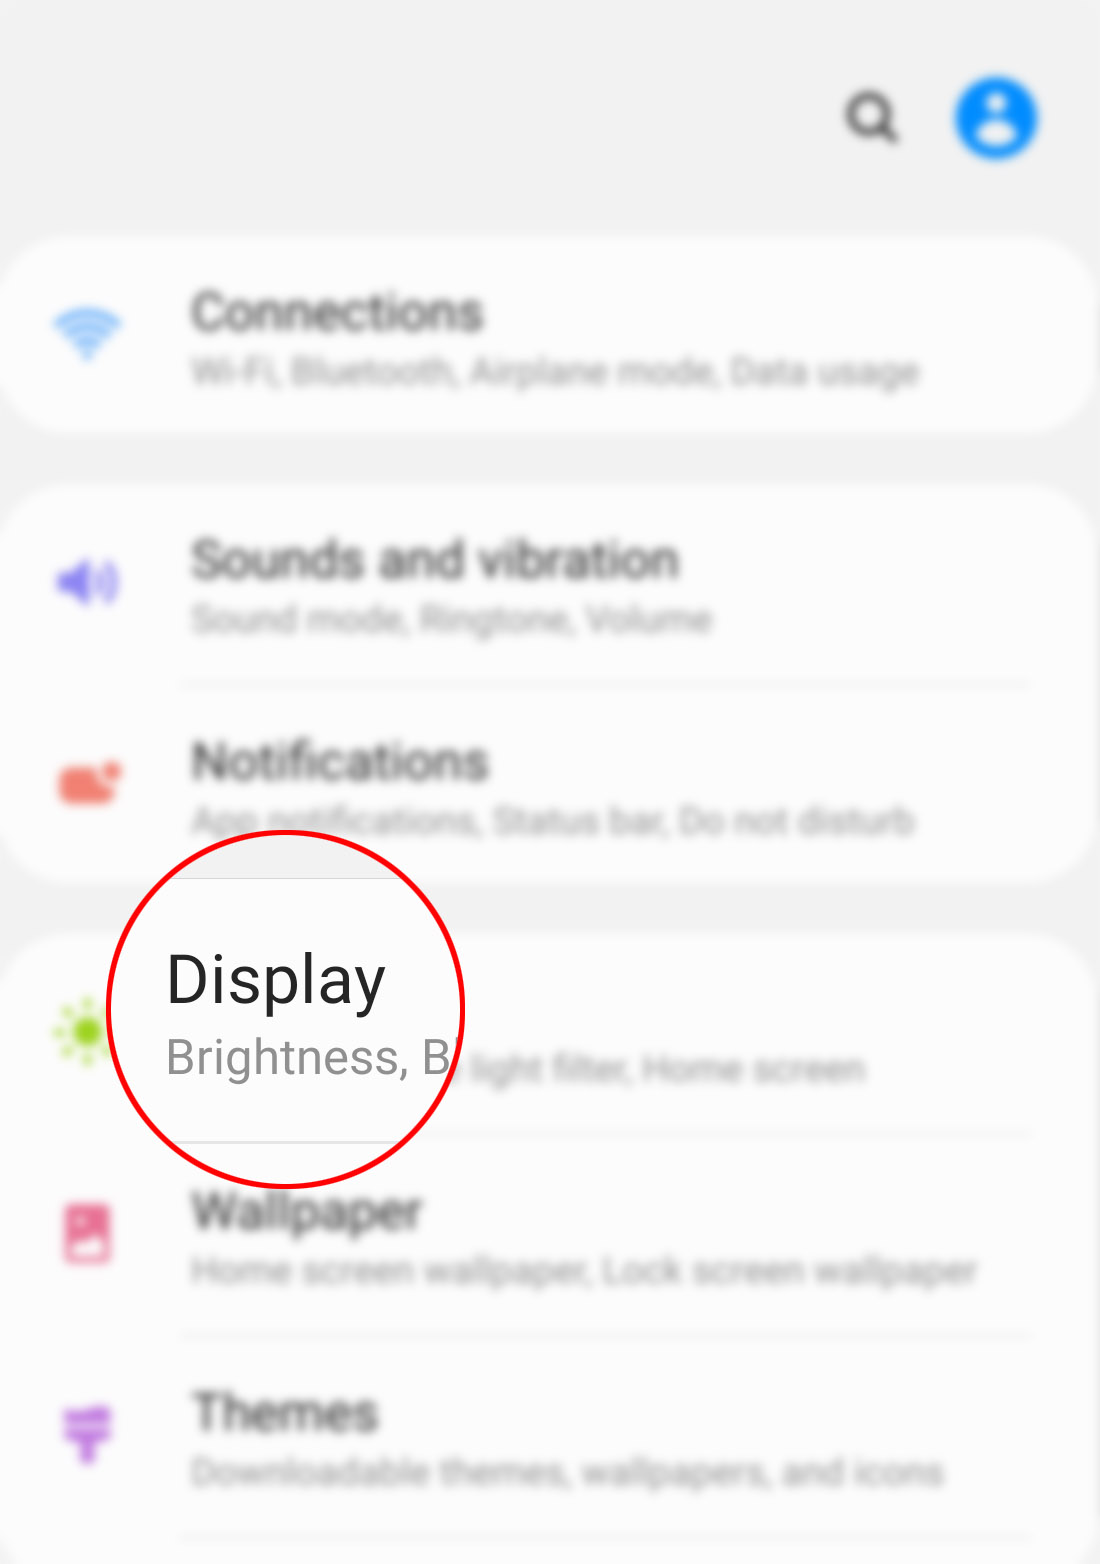 download new fonts on galaxy s20 - display settings